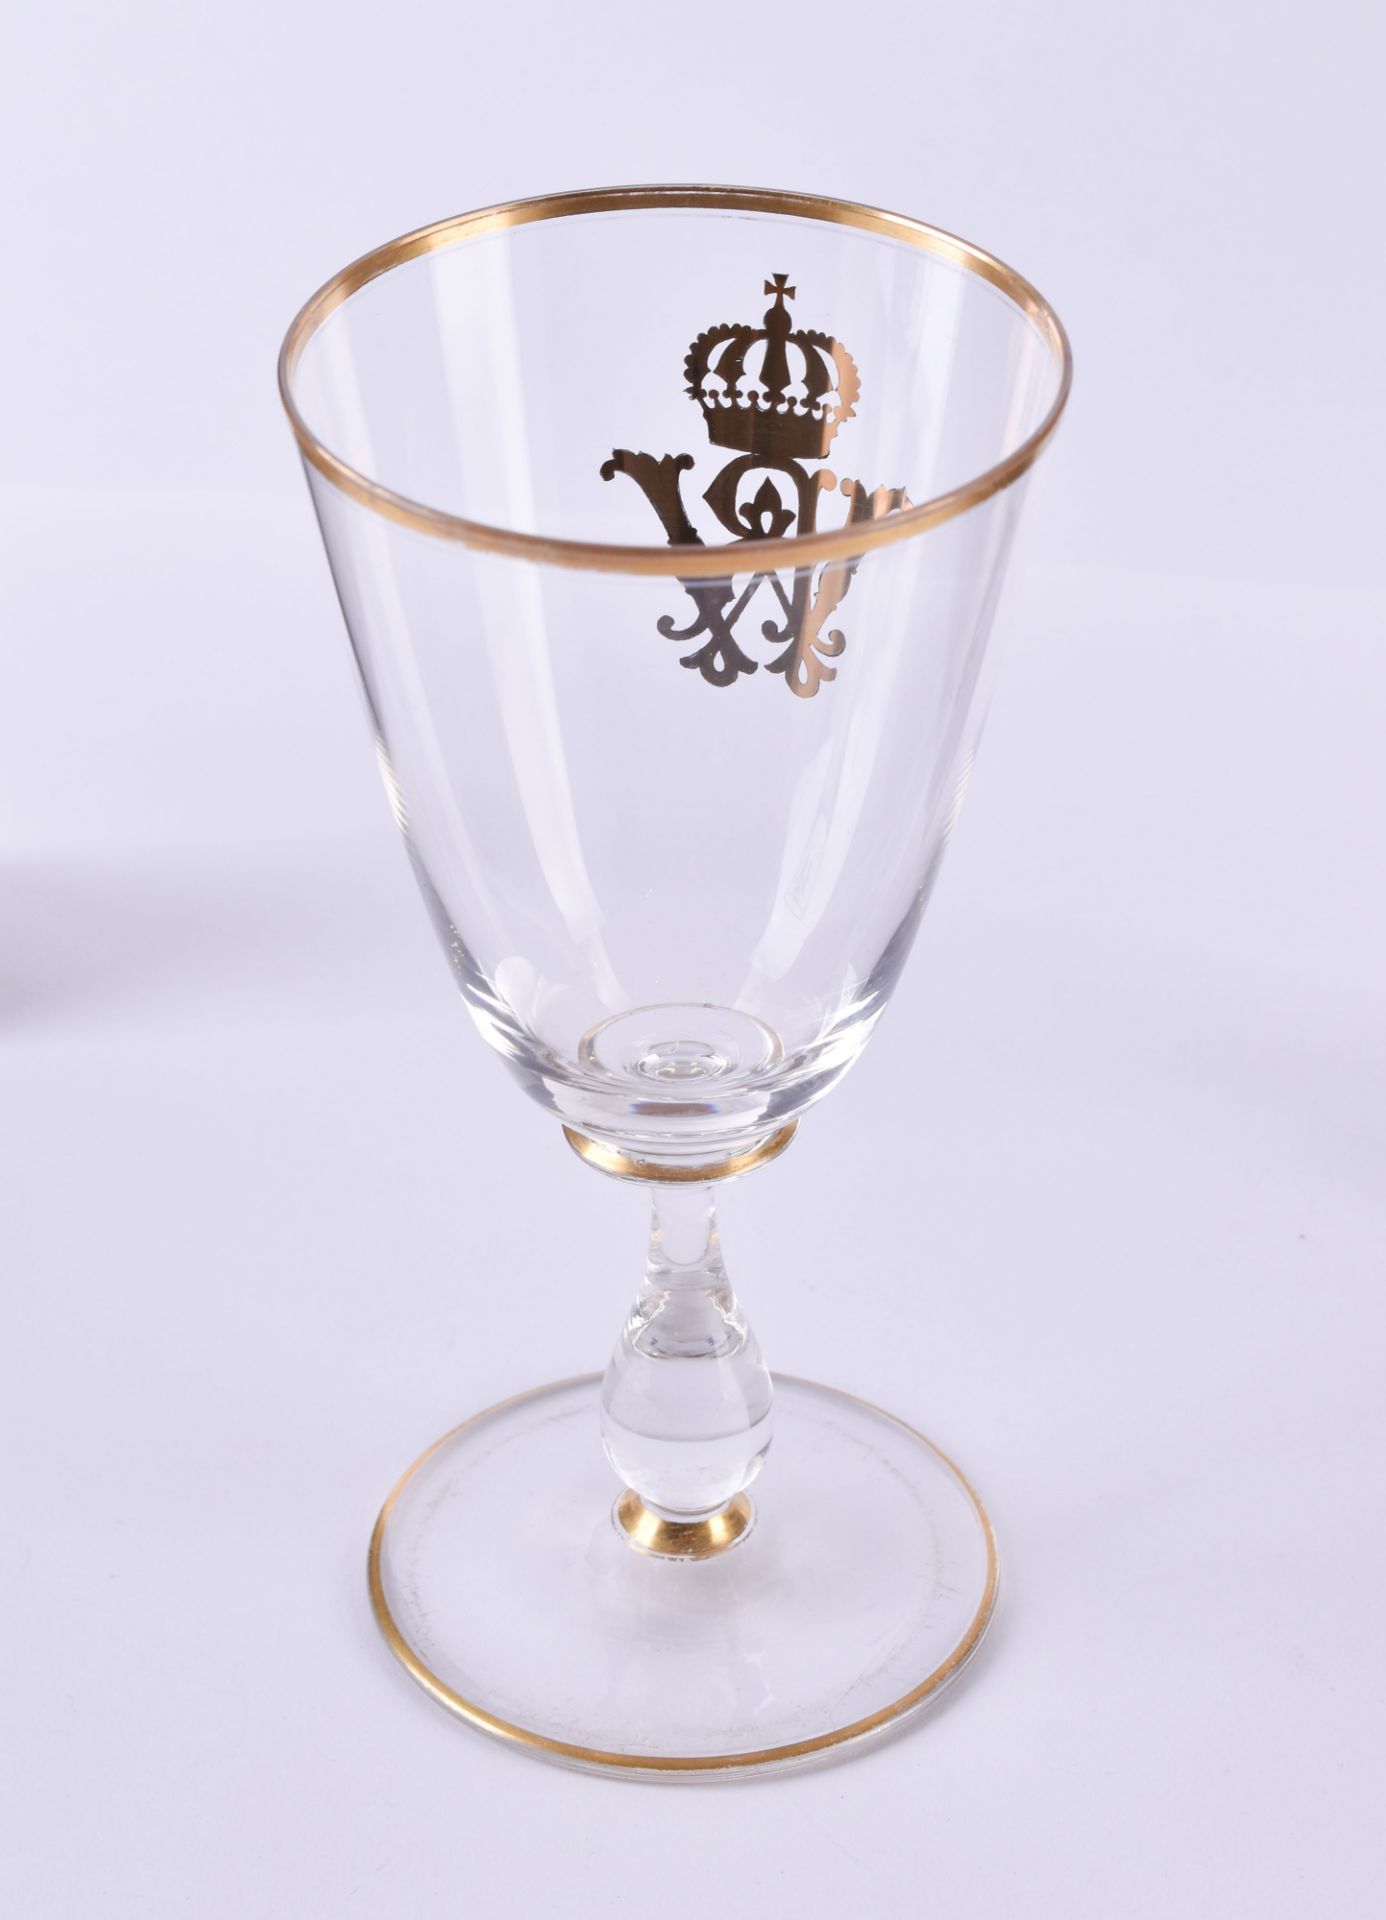 Wine goblet from a service for Kaiser Wilhelm II - Image 3 of 3